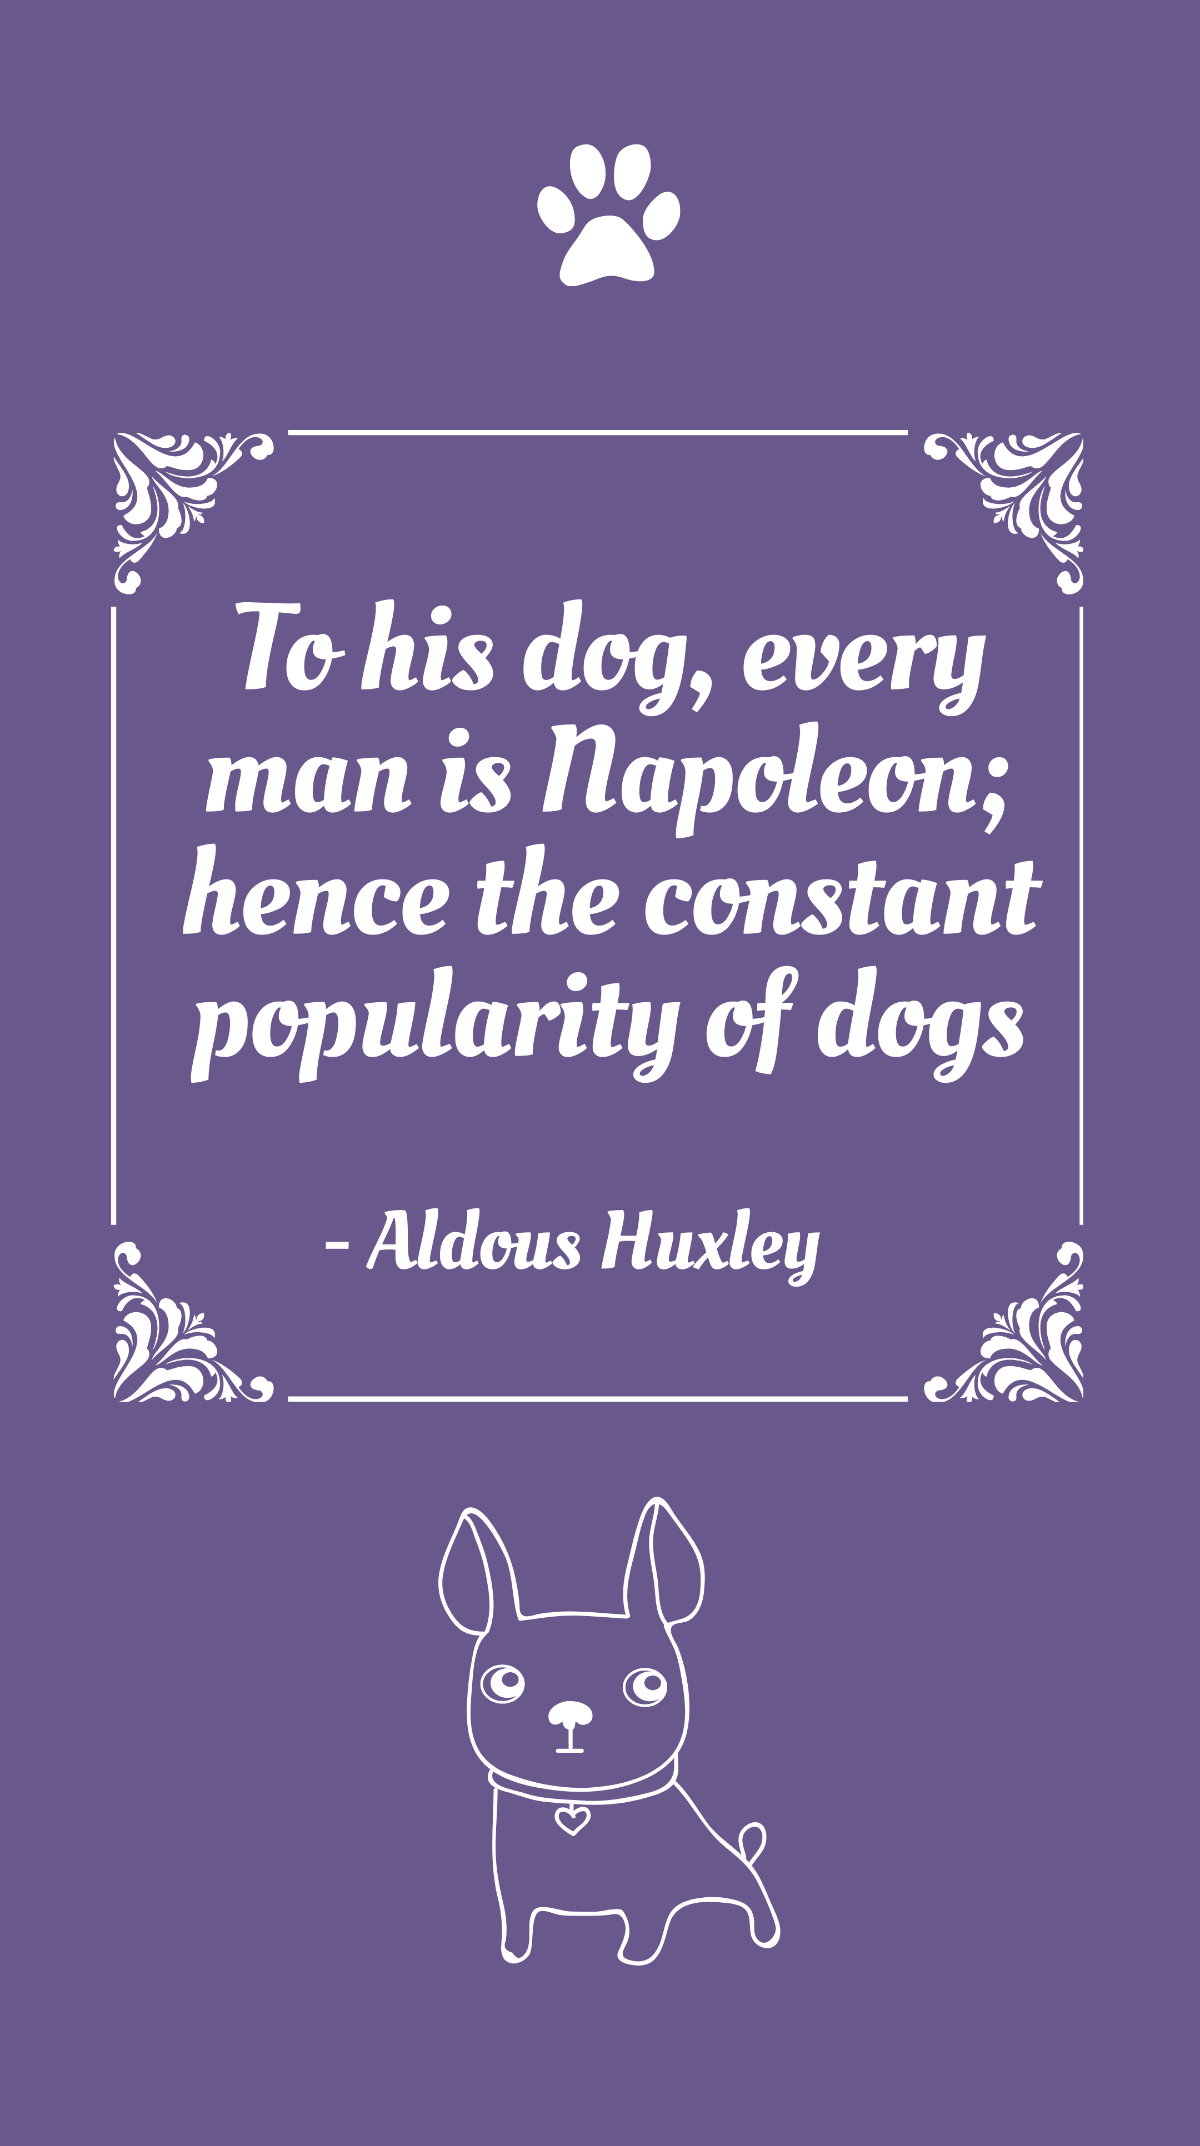 Free Aldous Huxley - To his dog, every man is Napoleon; hence the constant popularity of dogs Template